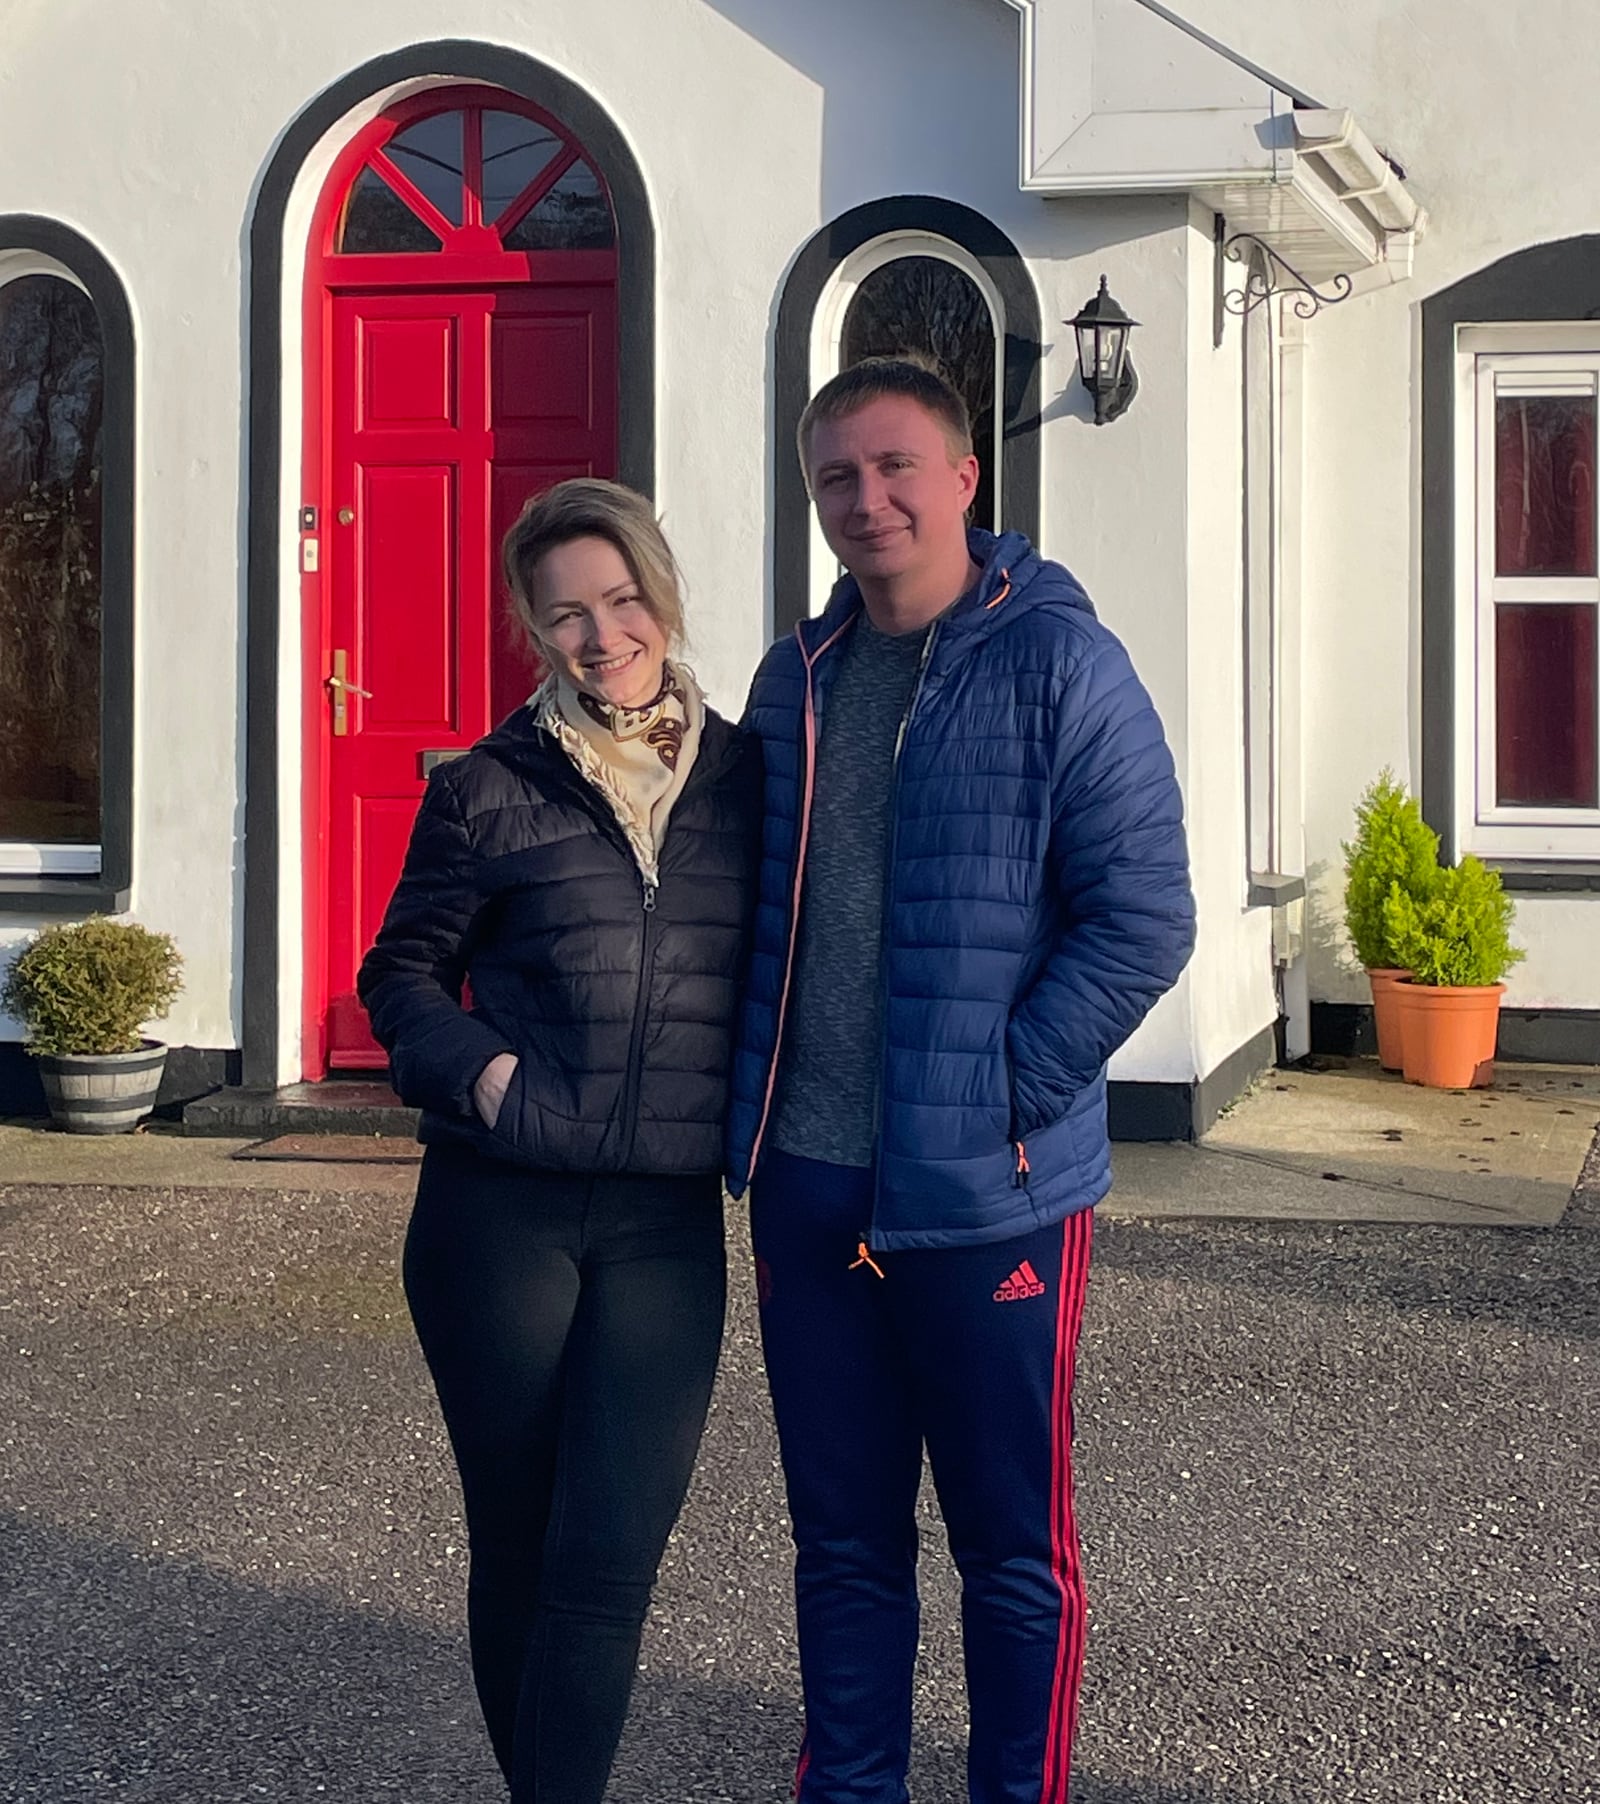 Nataly and Danis Seitikova, who are staying in Michael Healy-Rae's guesthouse in Kerry